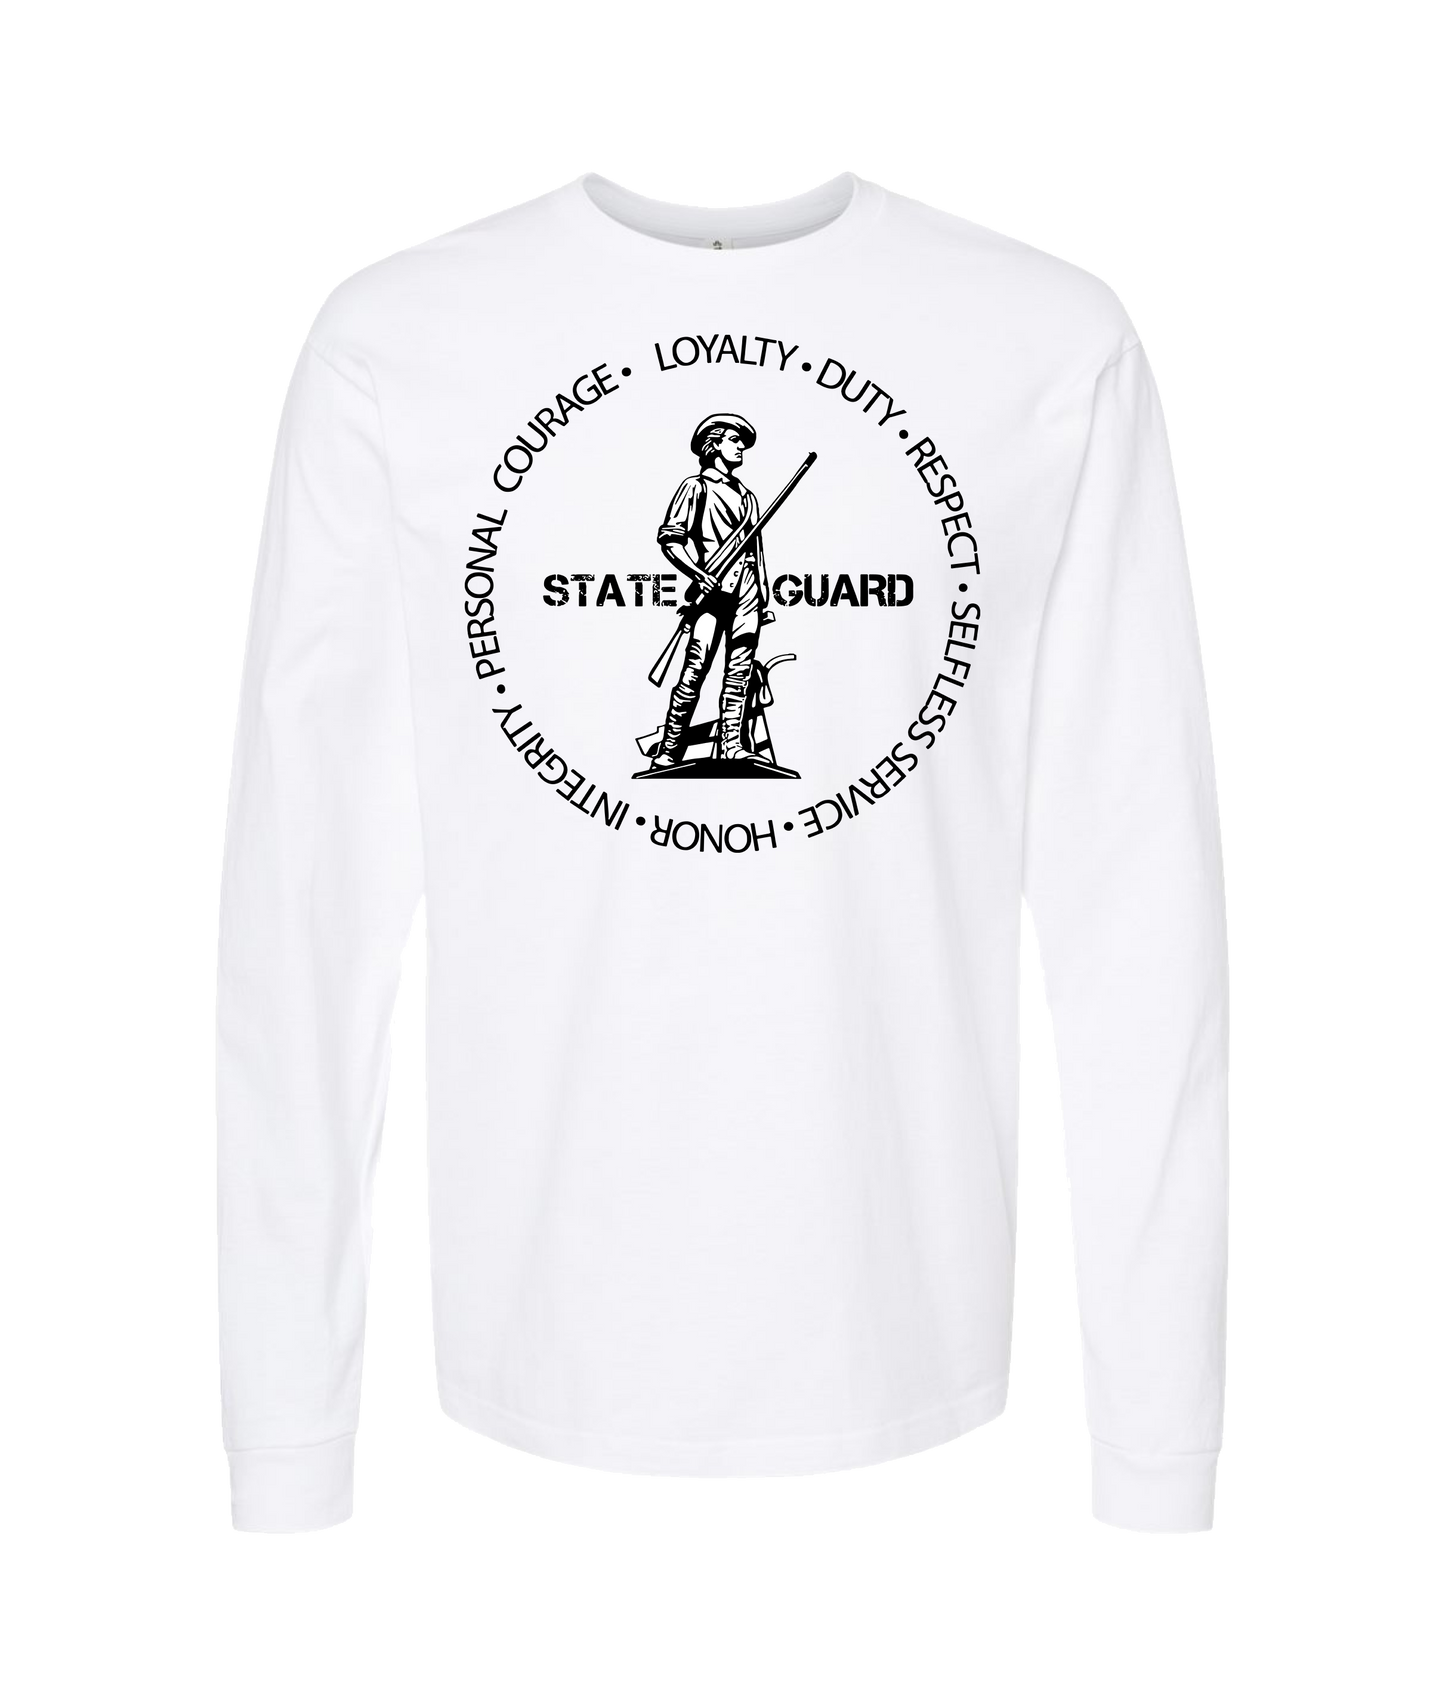 State Guard Apparel - STATE GUARD - White Long Sleeve T